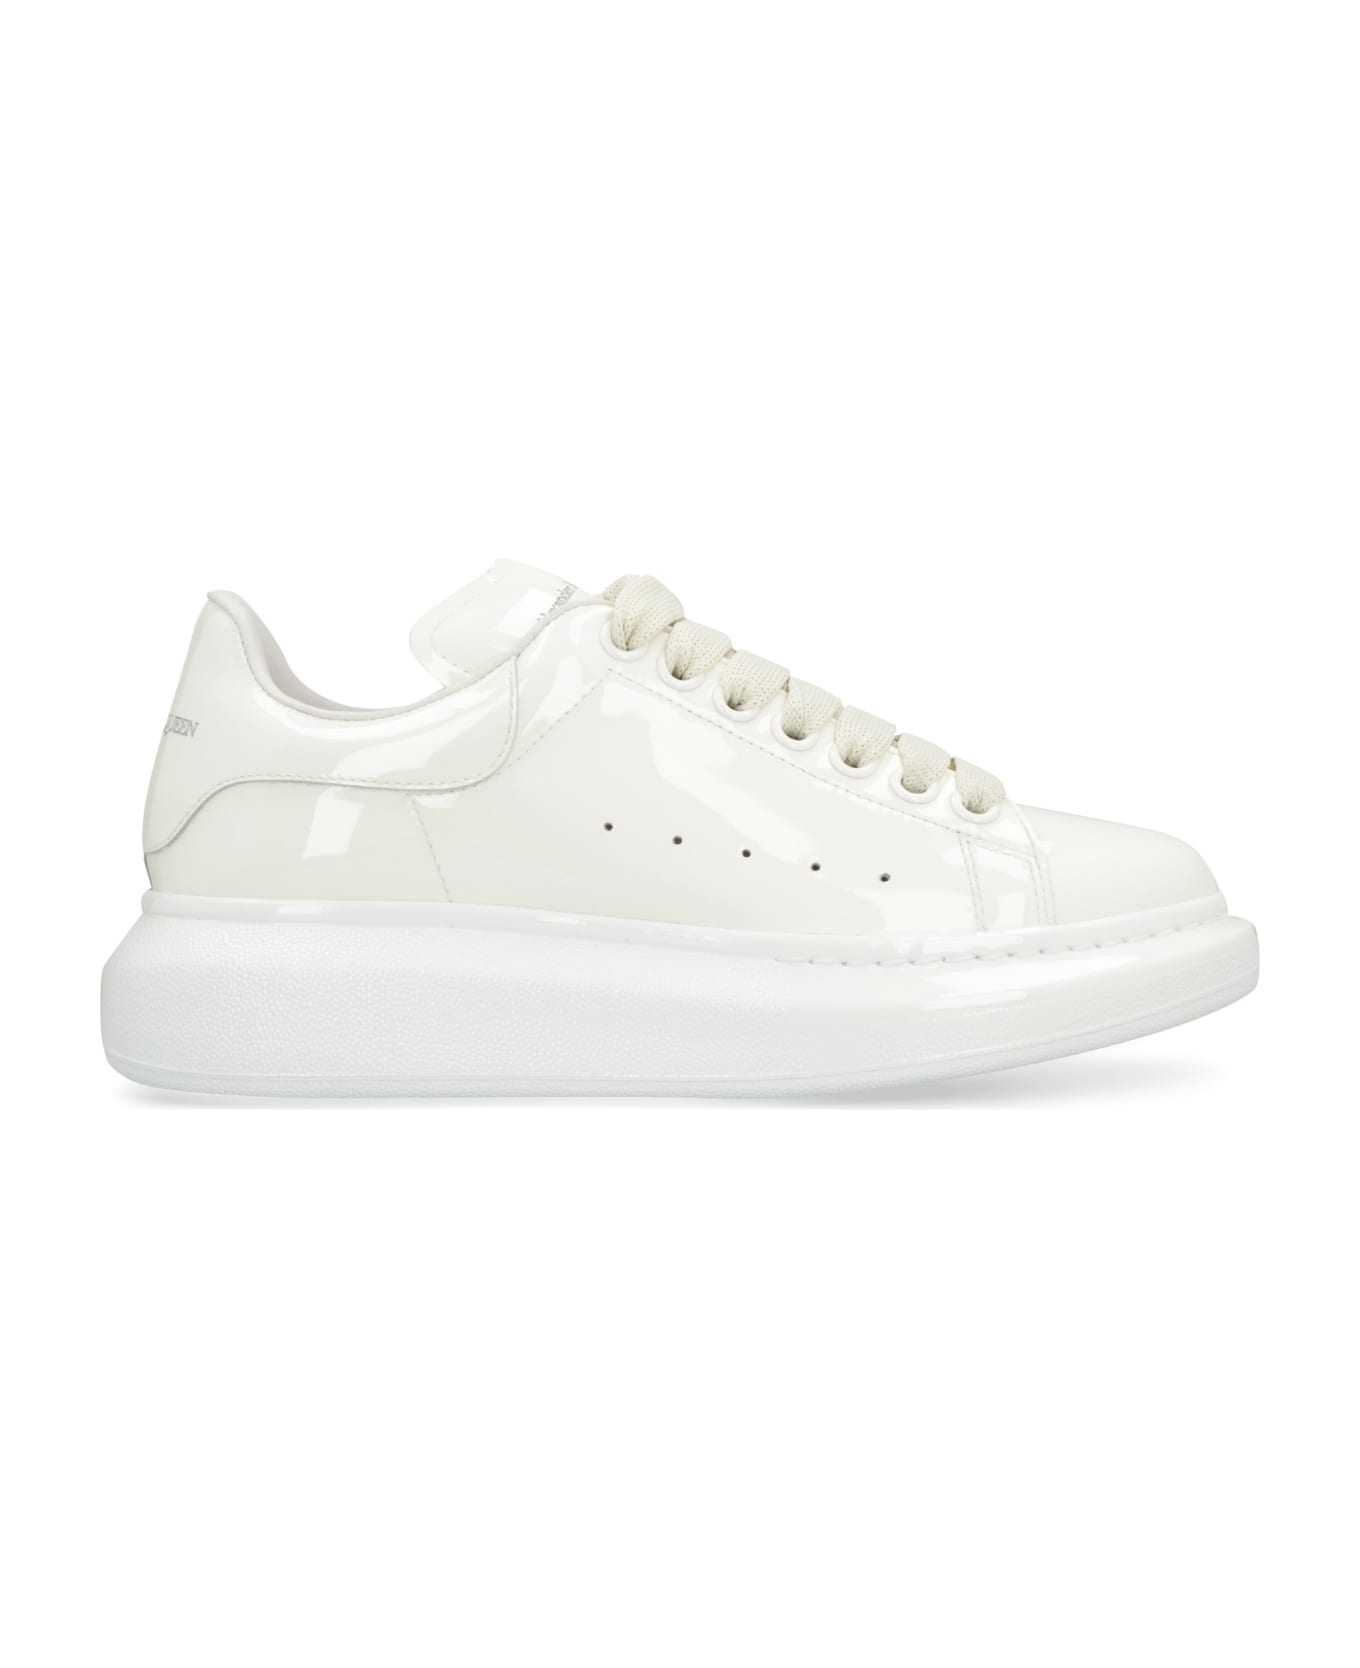 Alexander McQueen Larry Patent Leather Sneakers - White